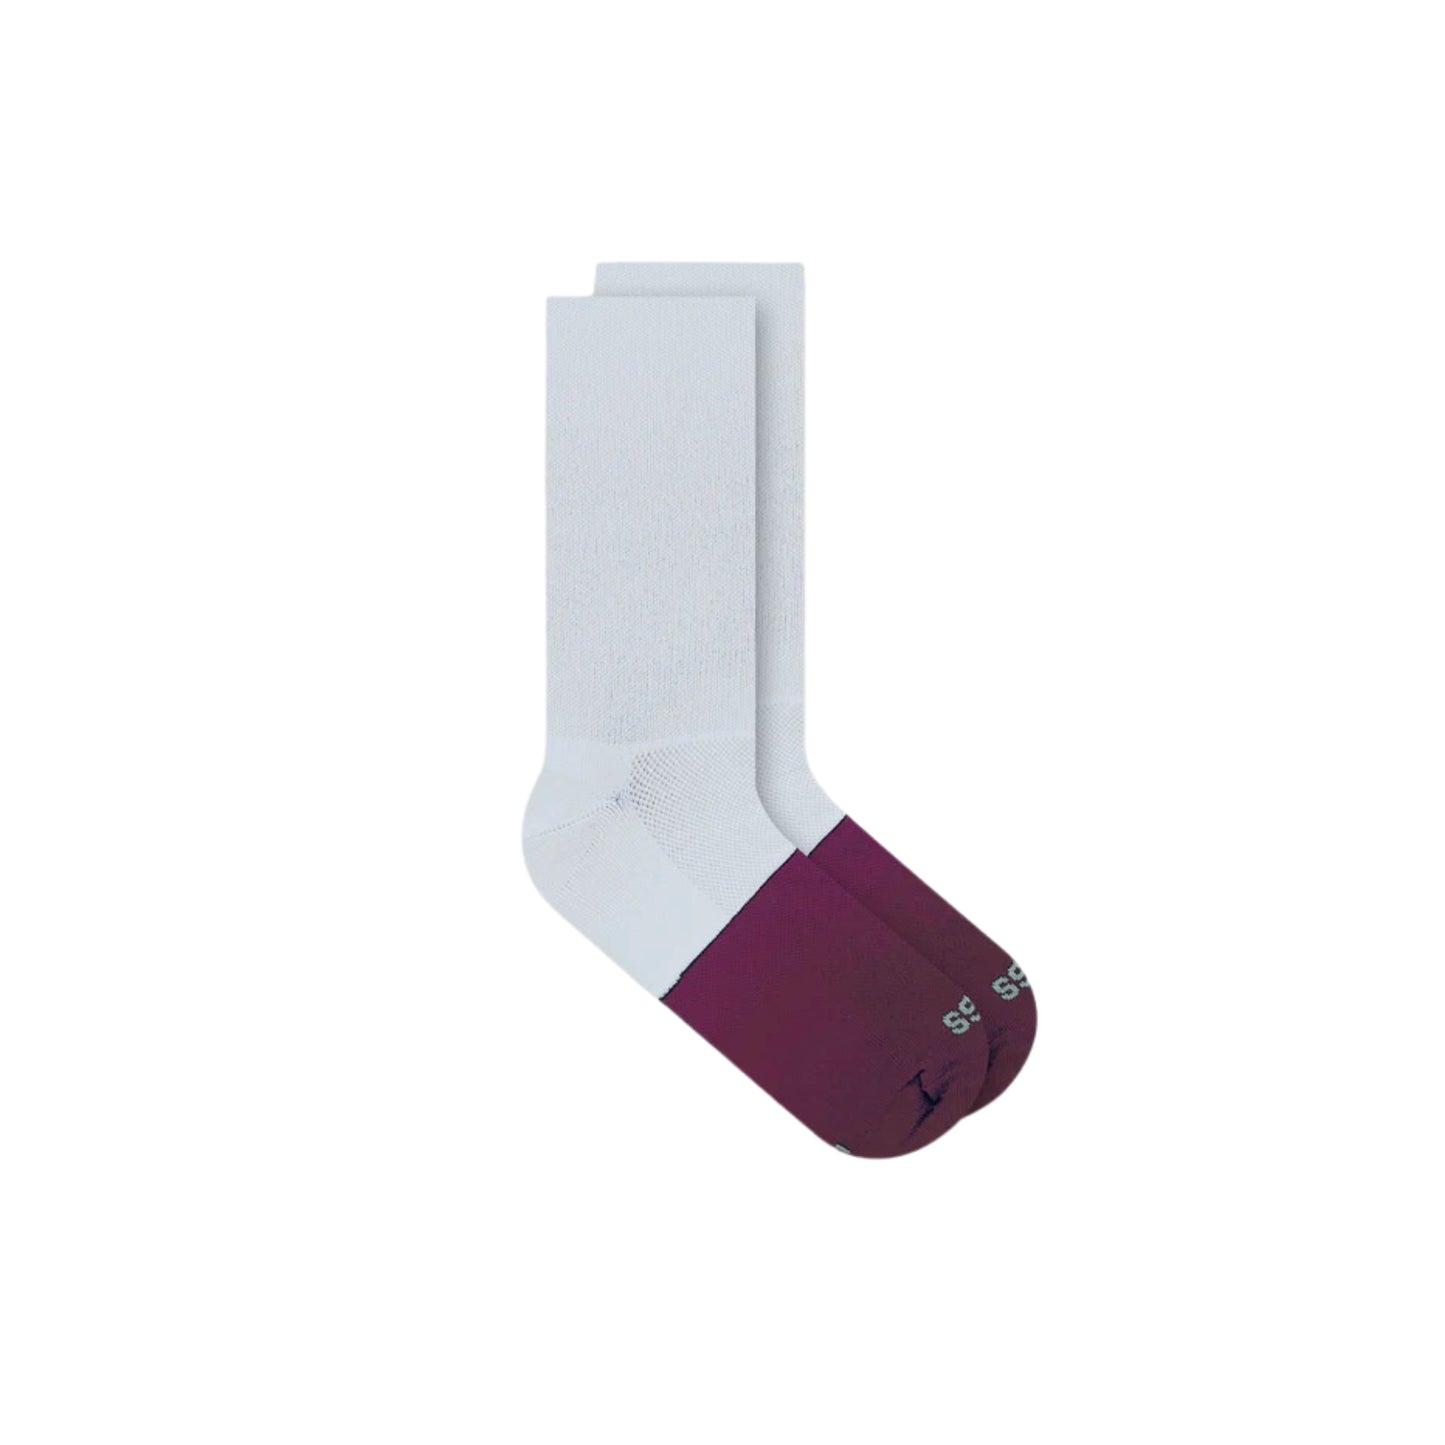 Calcetines de ciclismo NDLESS White